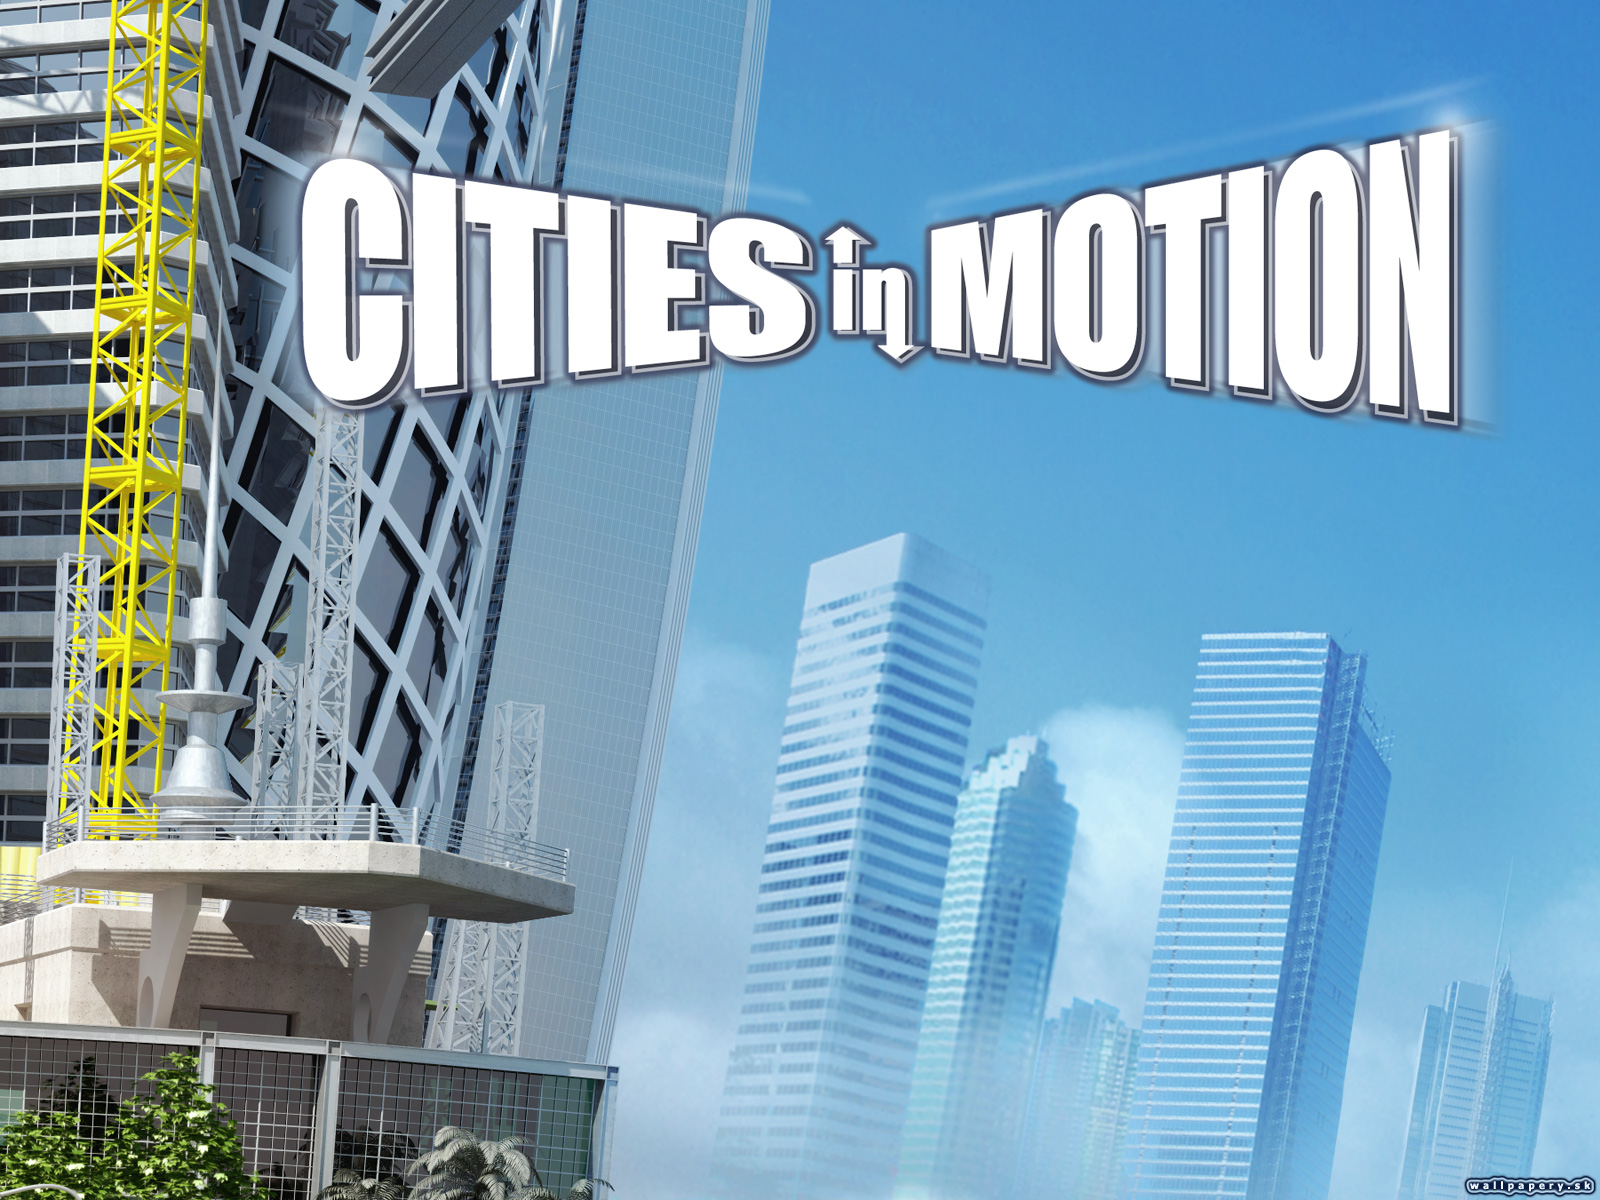 Cities in Motion - wallpaper 4